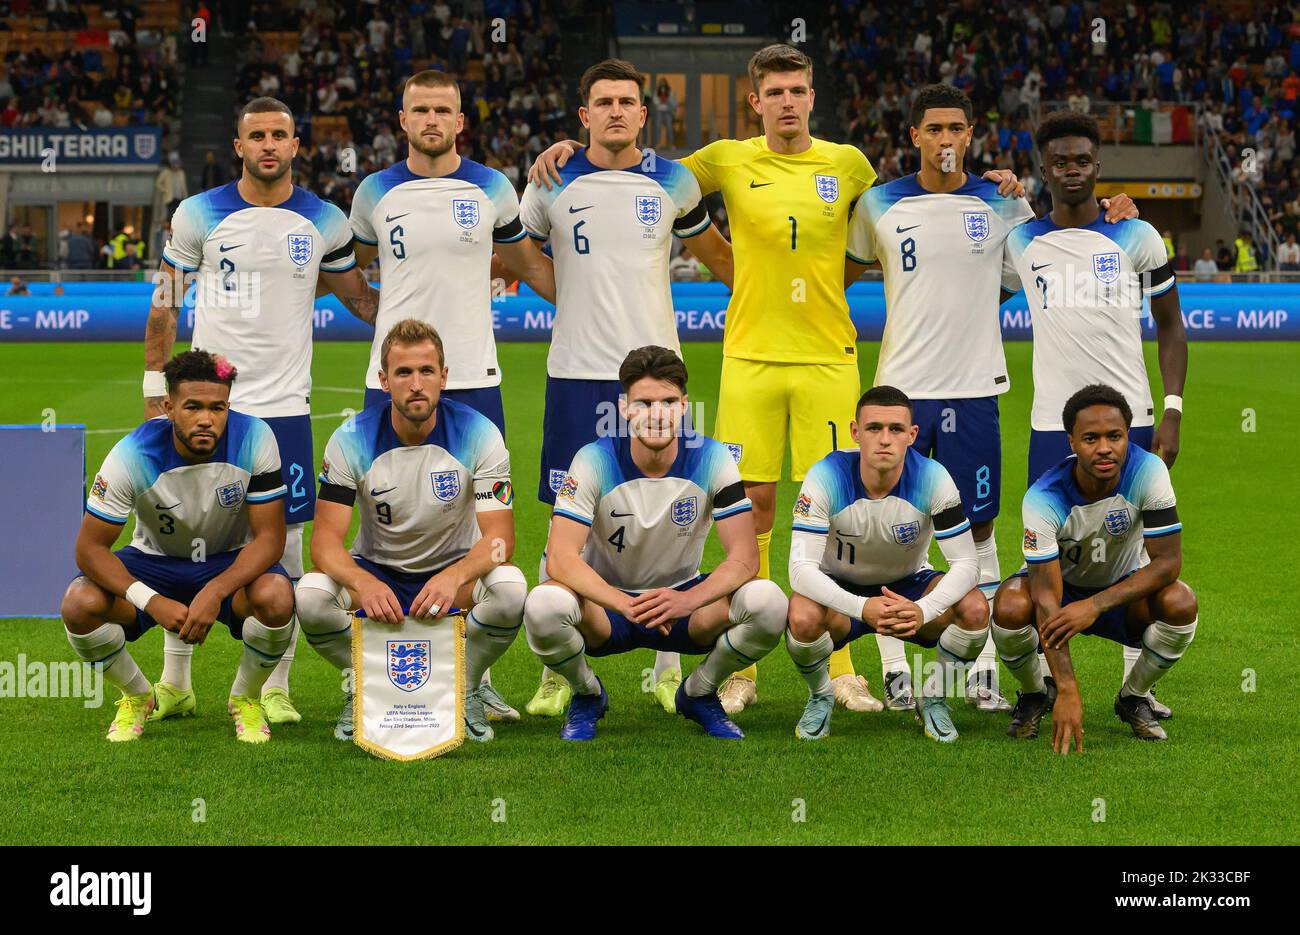 23 Sep 2022 - Italy v England - UEFA Nations League - Group 3 - San Siro  The England Team Group.  Nick Pope, Kyle Walker, Reece James, Declan Race, Eric Dier, Harry Maguire, Bukayo Saka, Jude Bellingham, Harry Kane, Raheem Sterling, Phil Foden. Picture : Mark Pain / Alamy Live News Stock Photo